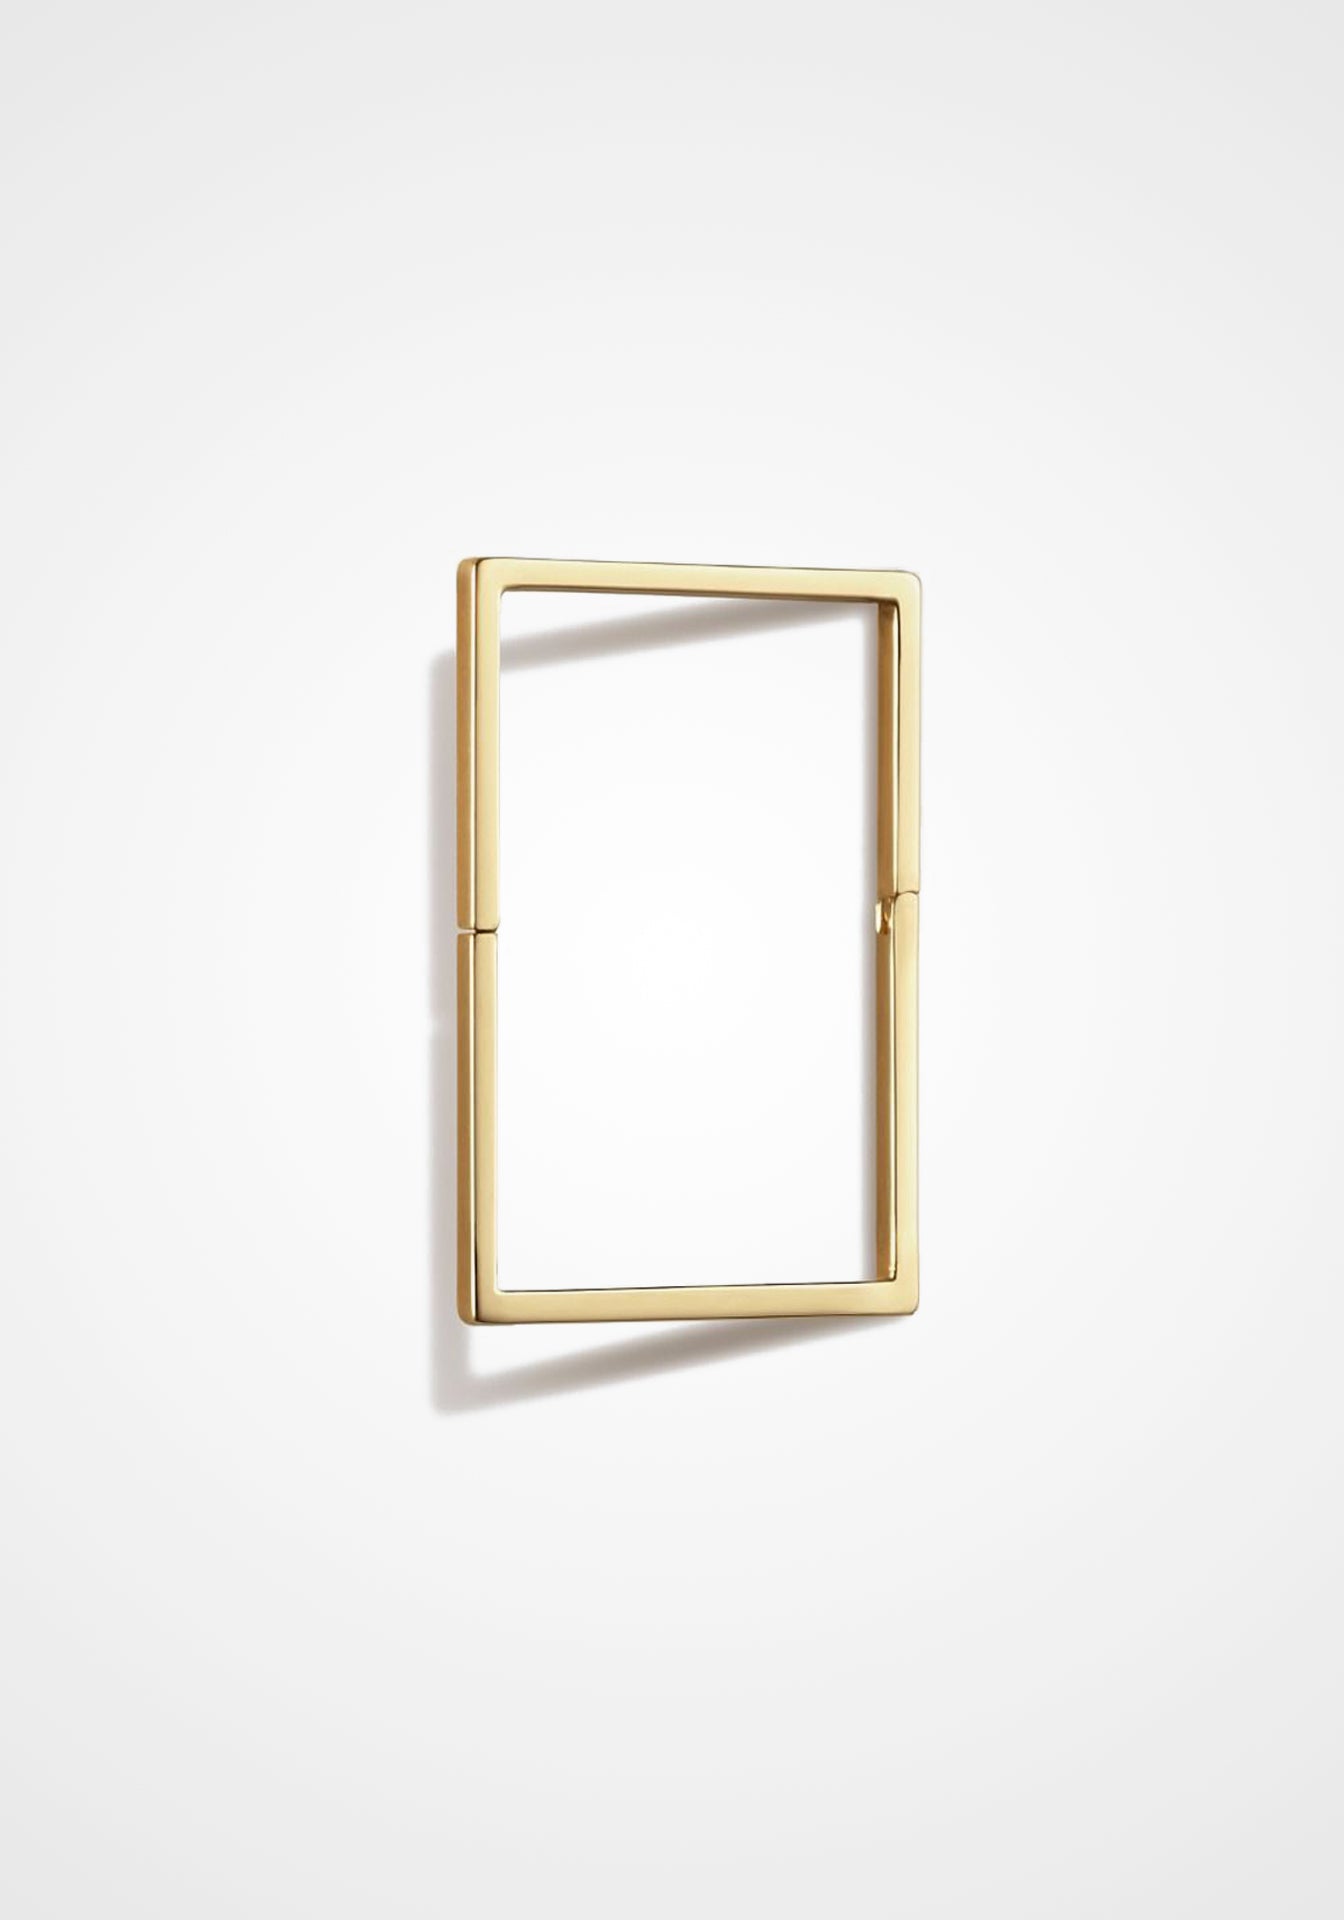 Square Form 20, 18K Yellow Gold Earring